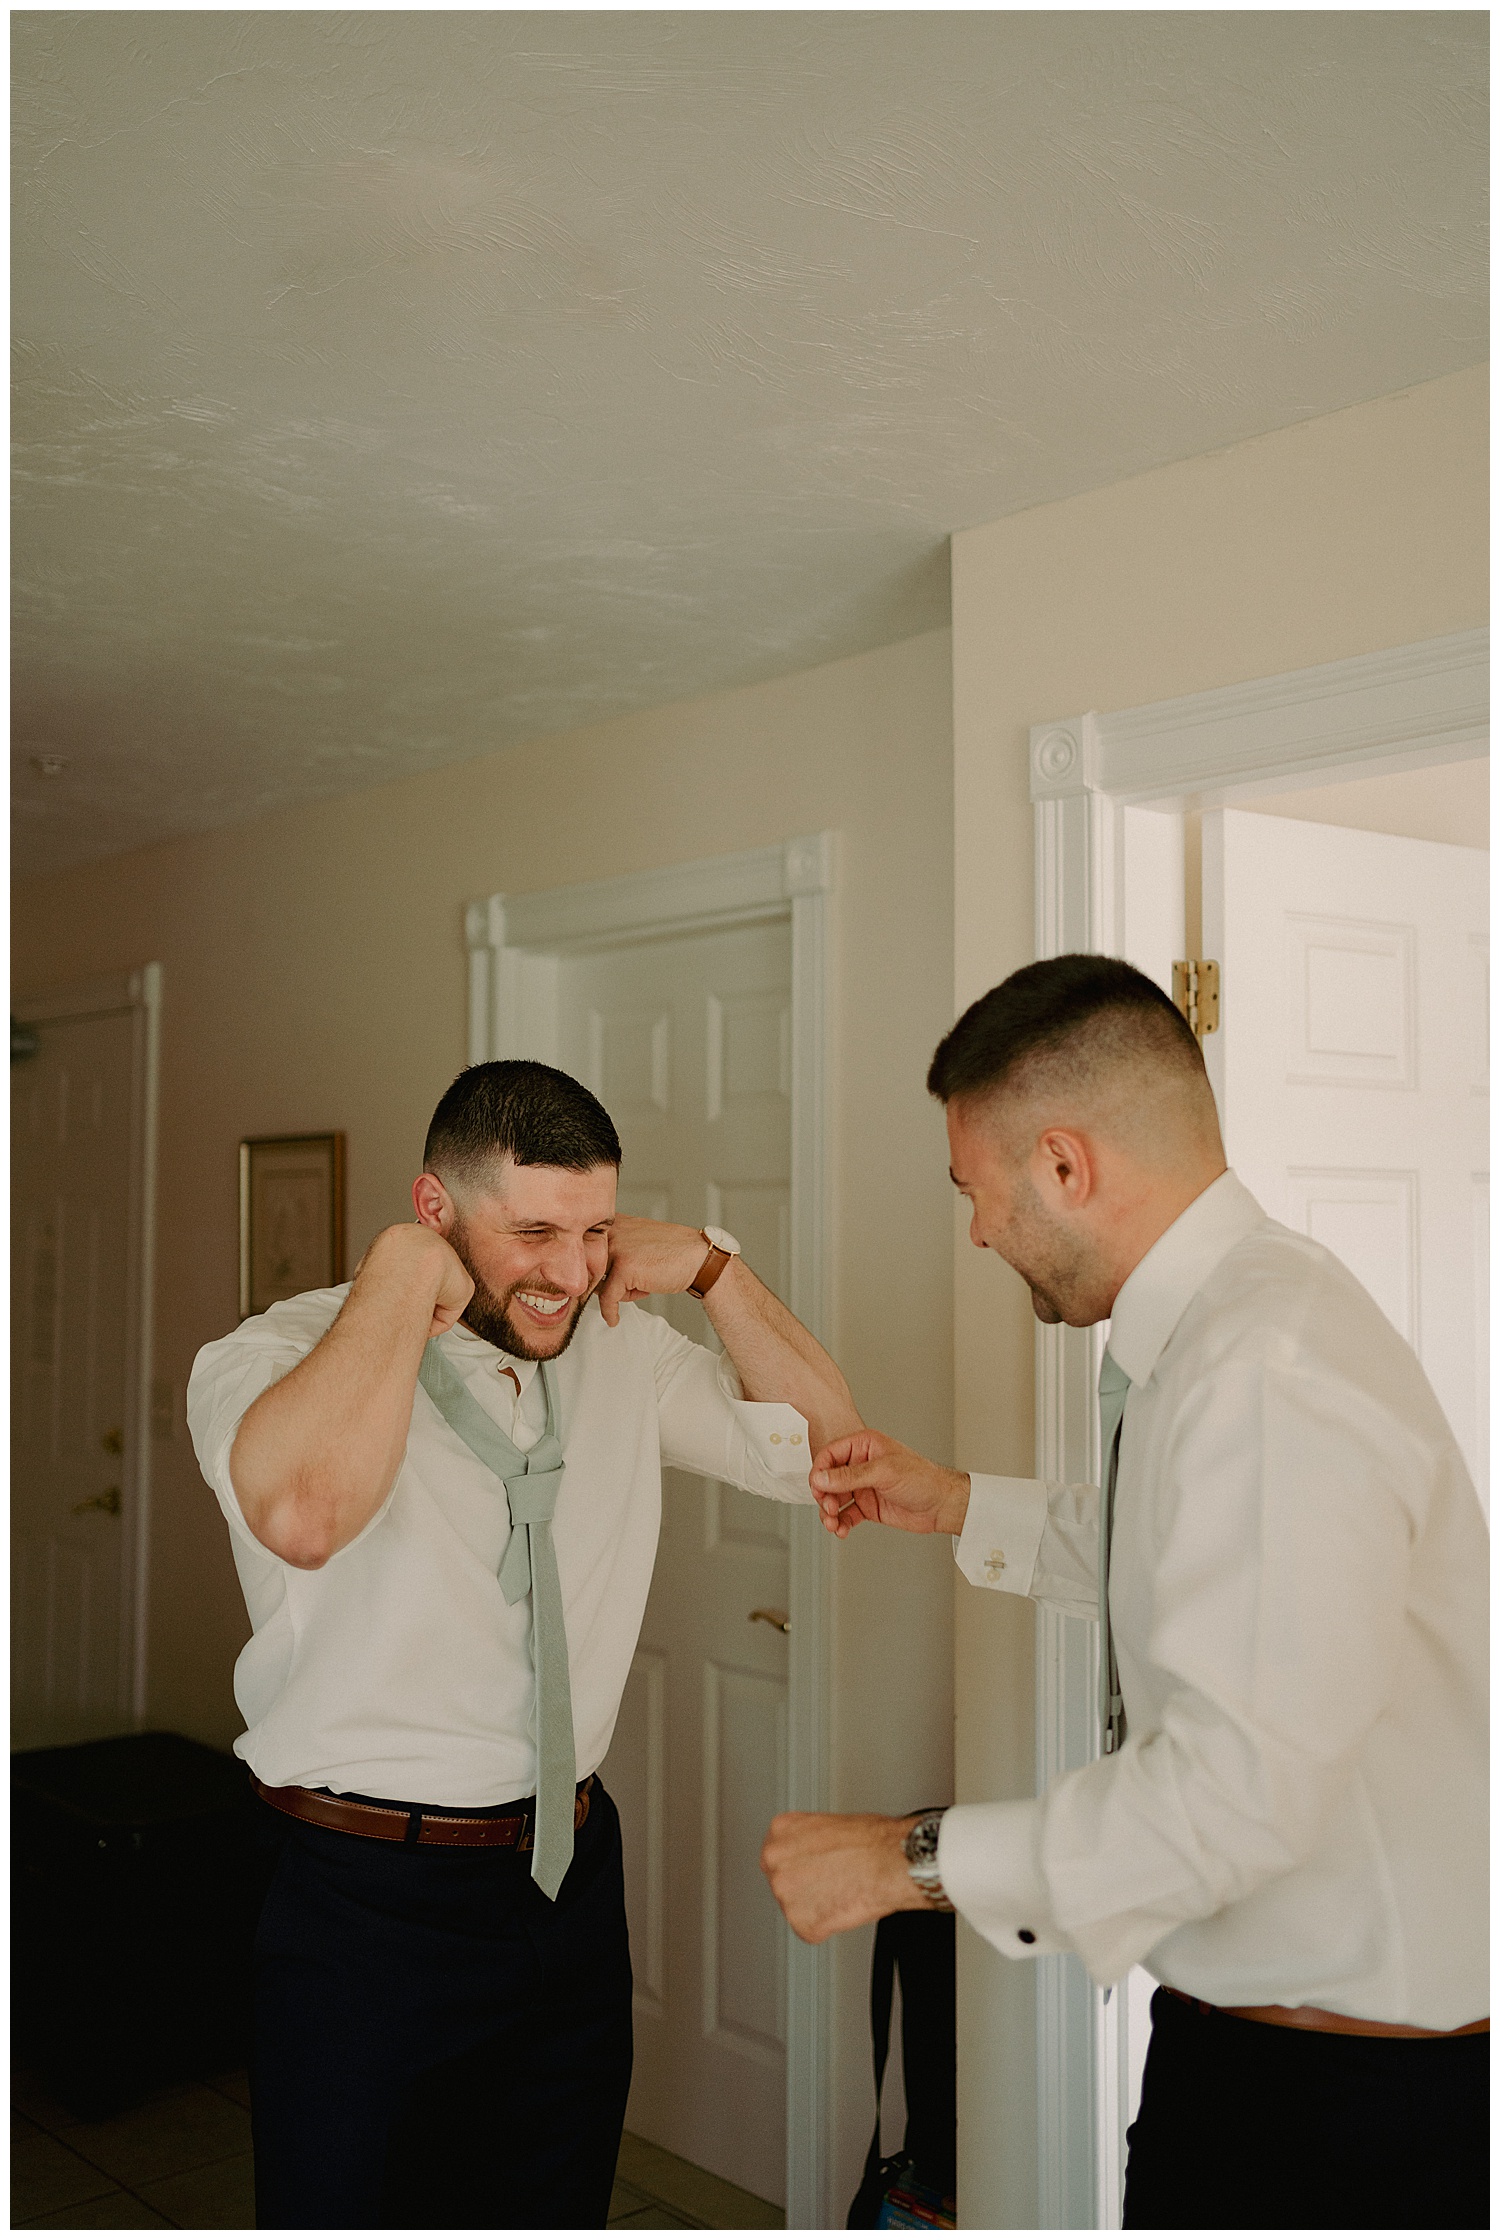 Groomsmen Getting Ready at By the Sea Inn on Cape Cod